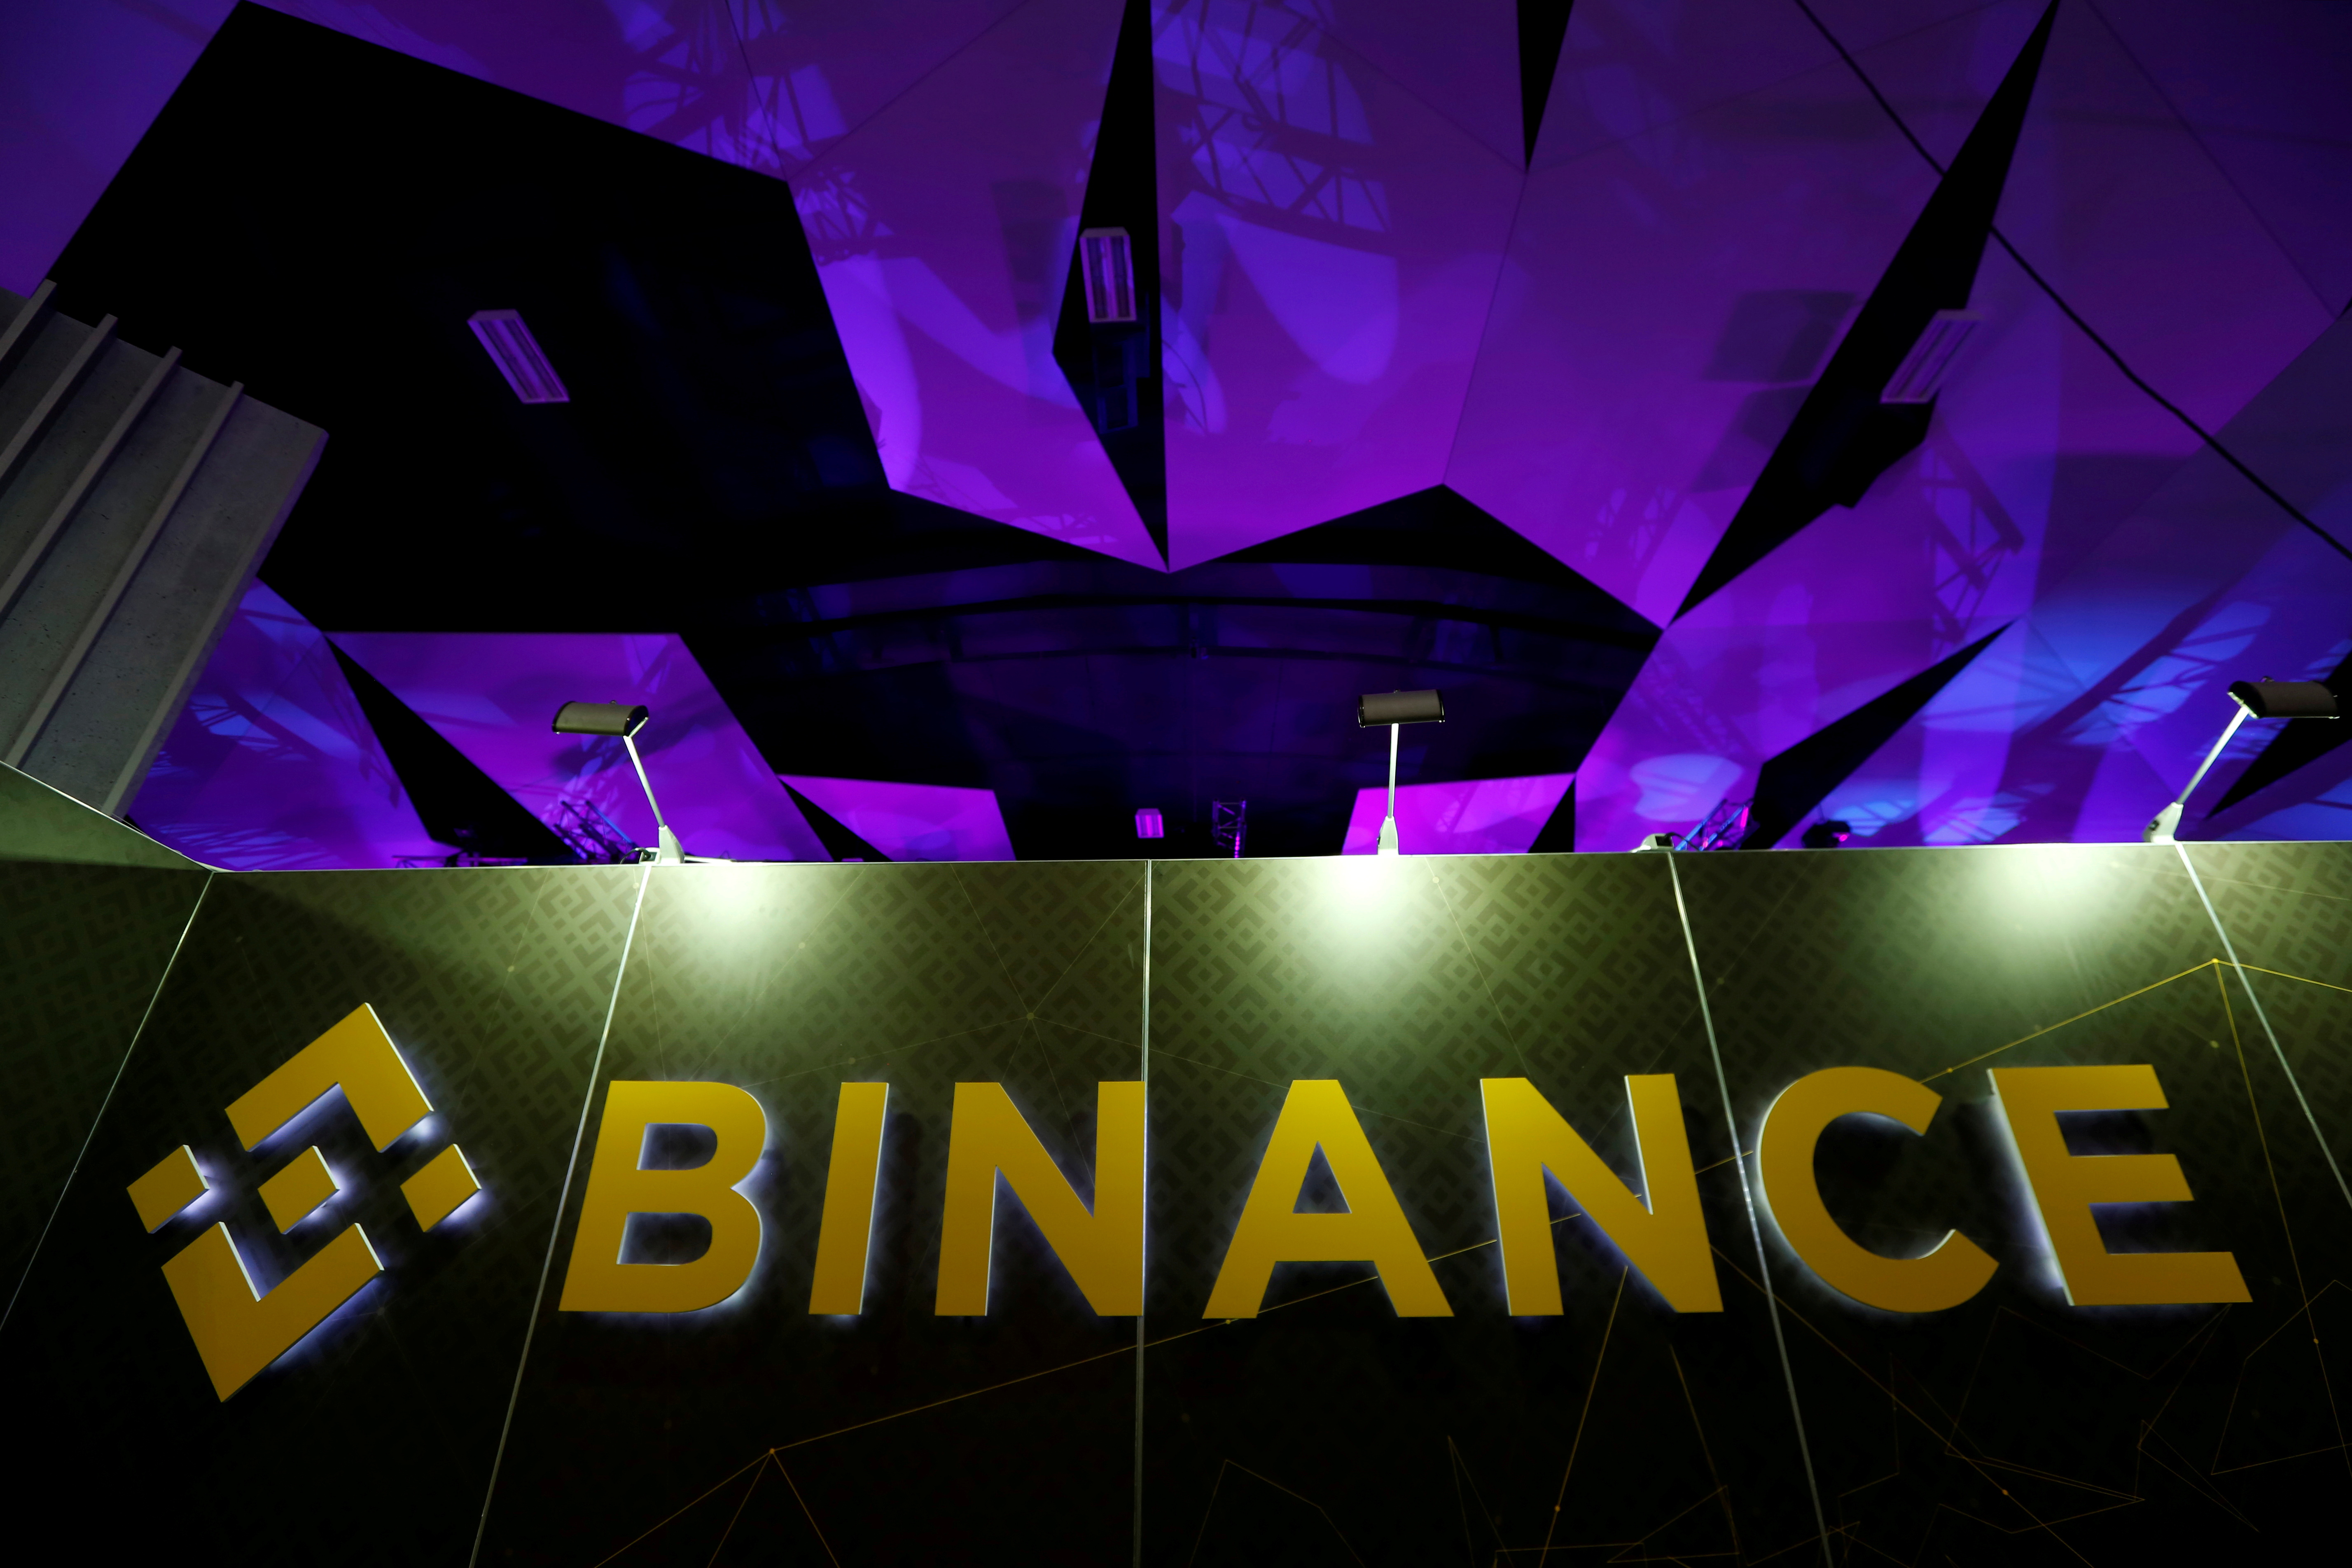 The logo of Binance is seen on their exhibition stand at the Delta Summit, Malta's official Blockchain and Digital Innovation event promoting cryptocurrency, in St Julian's